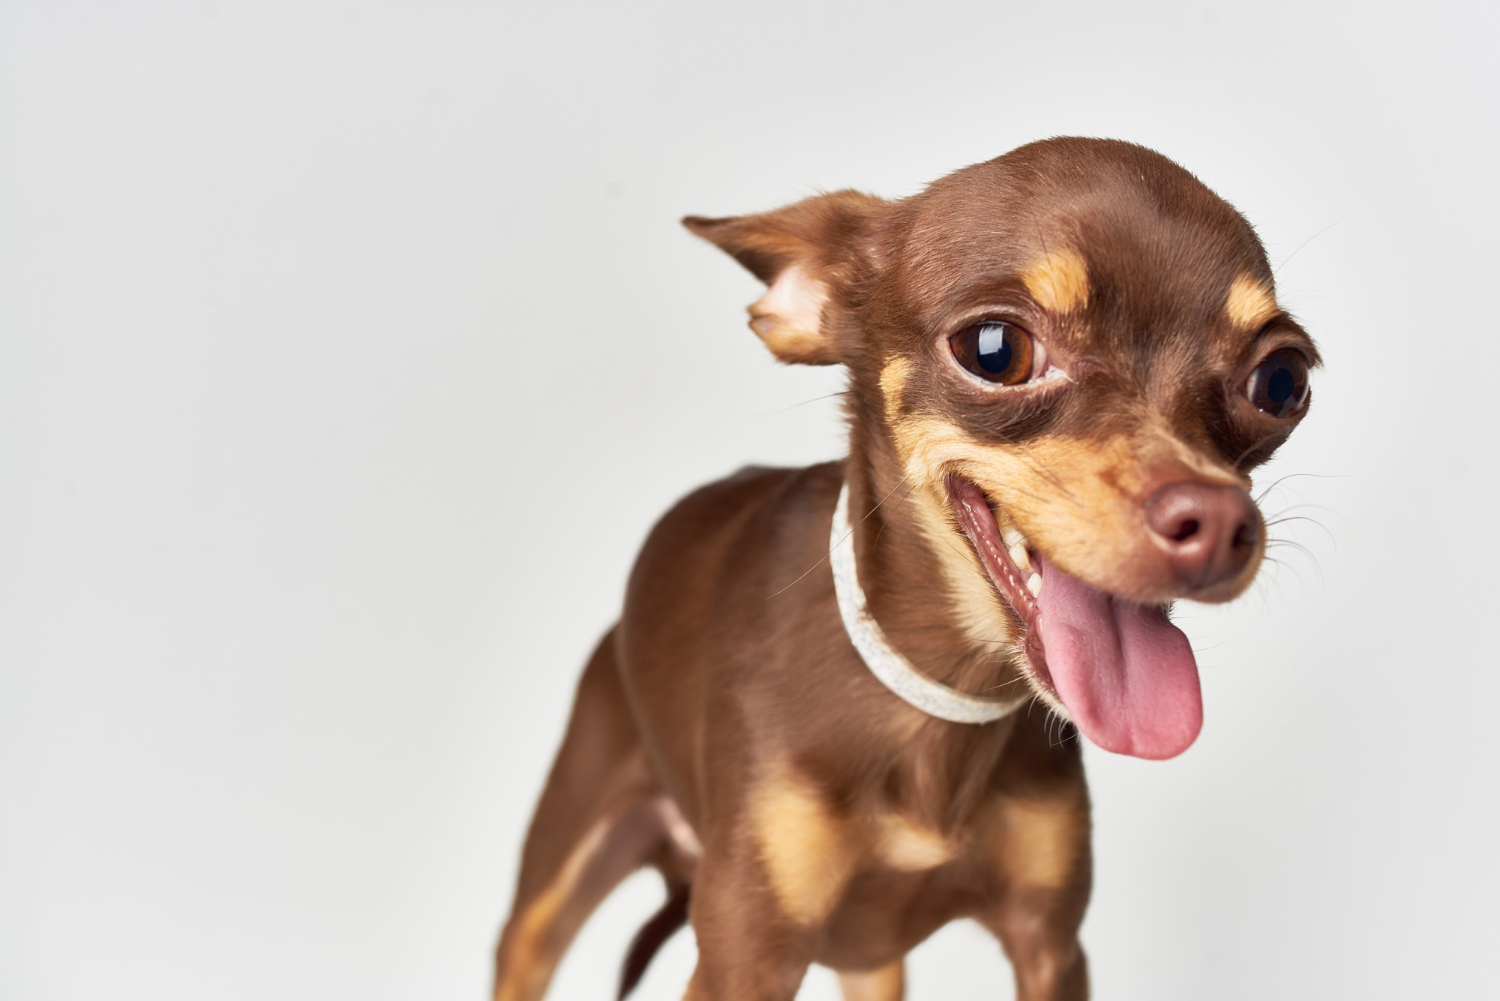 Can a chihuahua die from a seizure?